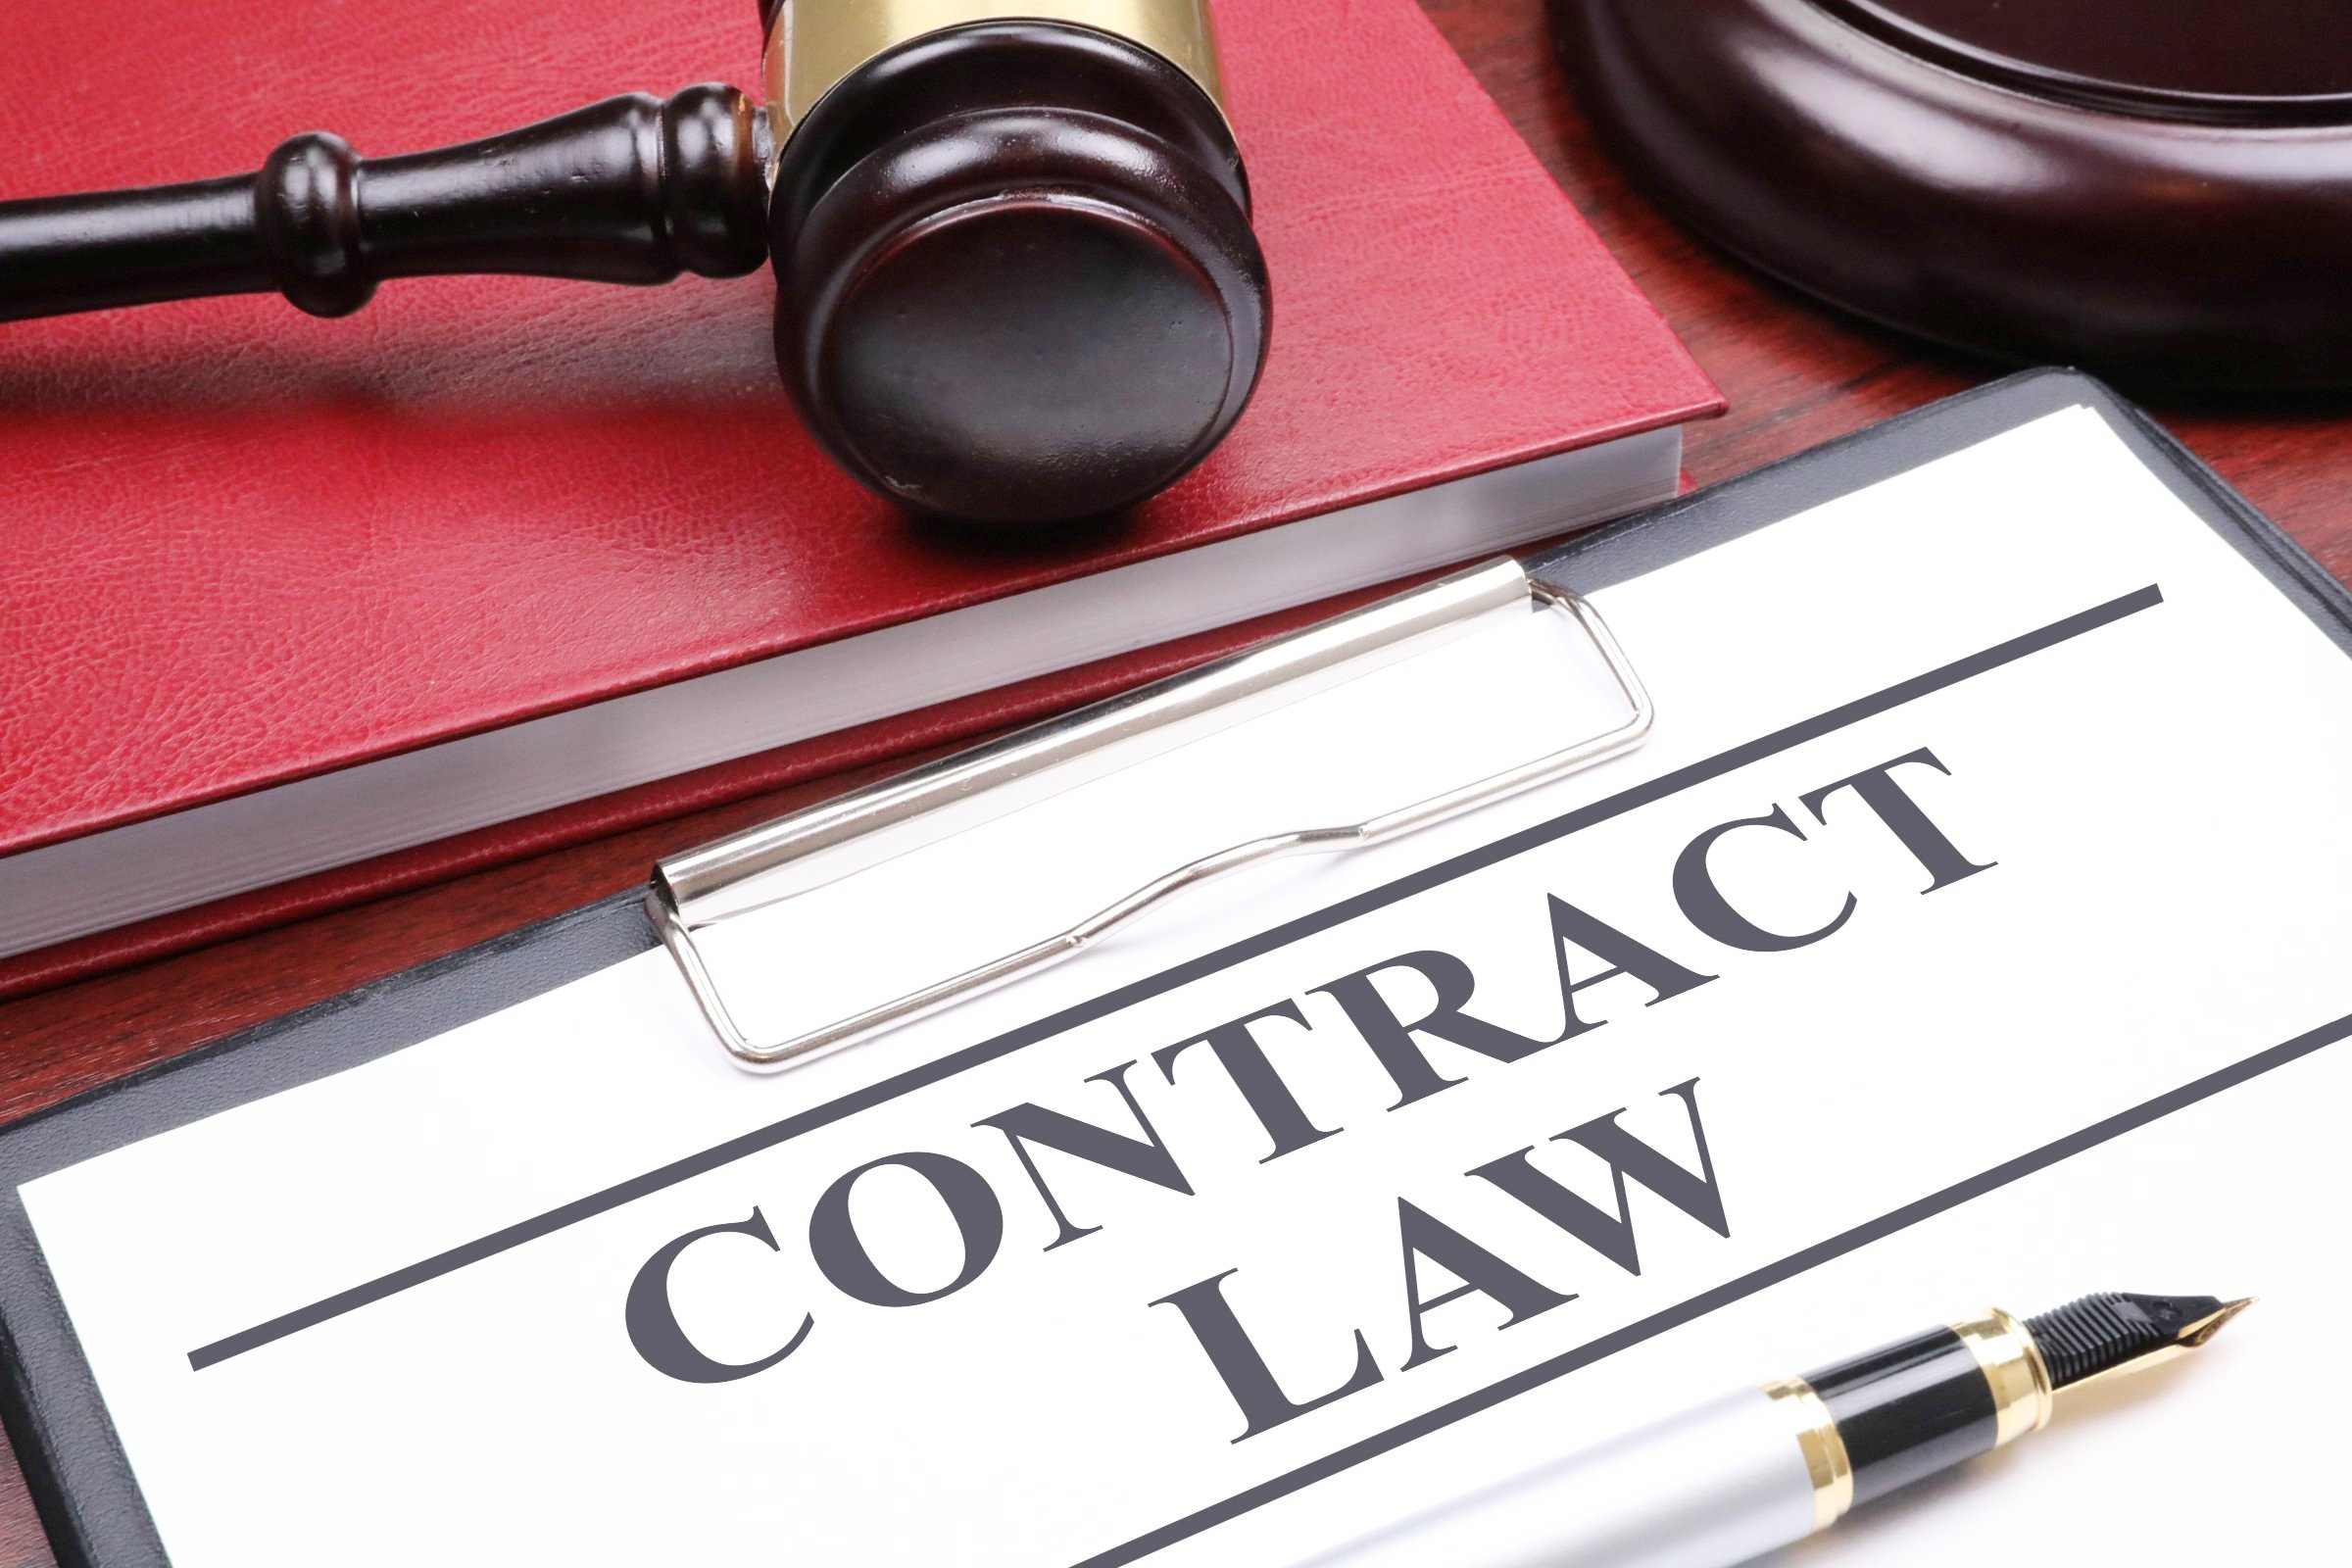 Contract Law - Free of Charge Creative Commons Legal 6 image